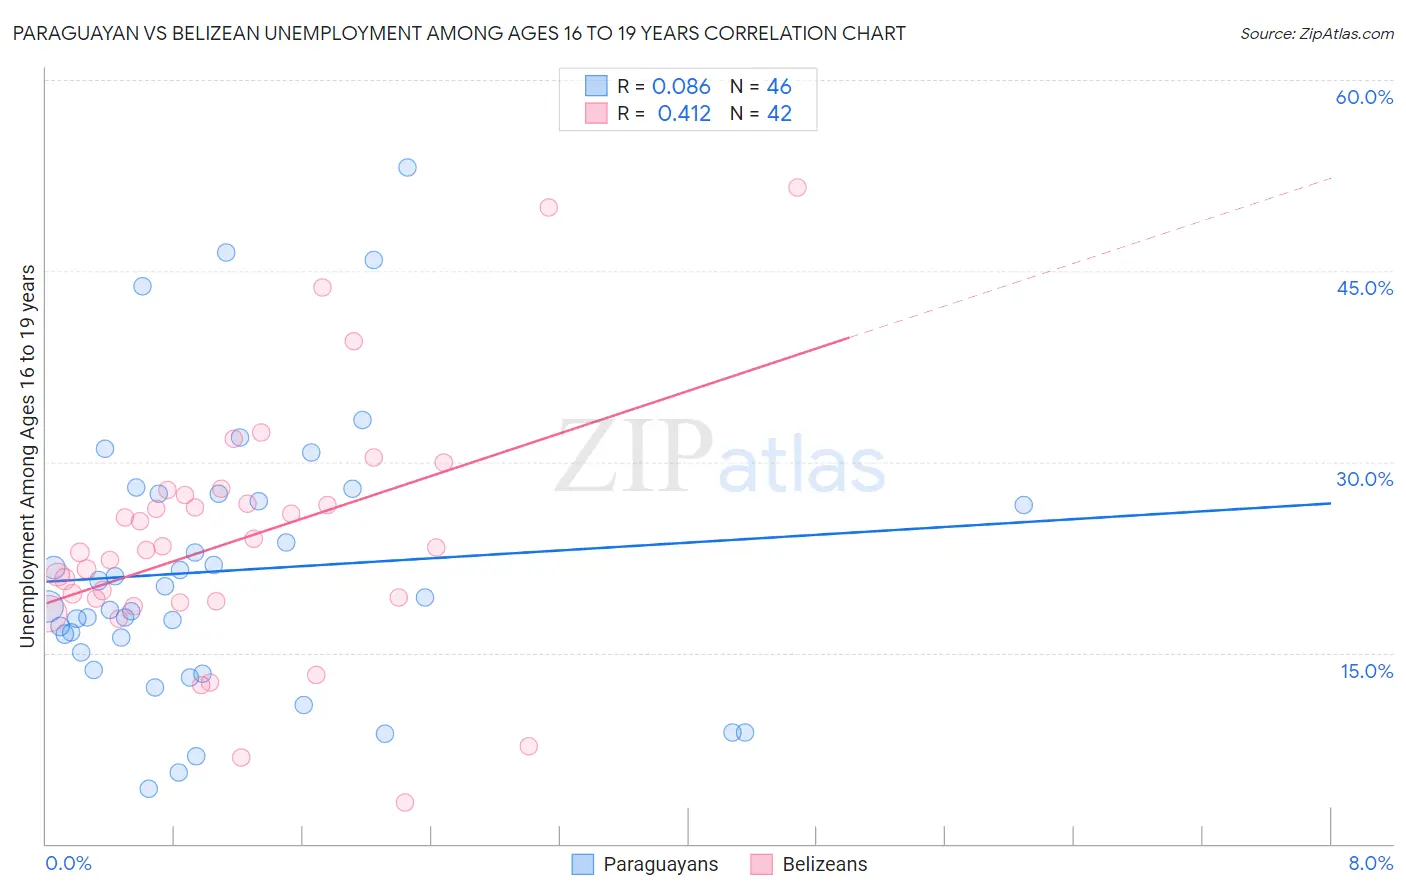 Paraguayan vs Belizean Unemployment Among Ages 16 to 19 years